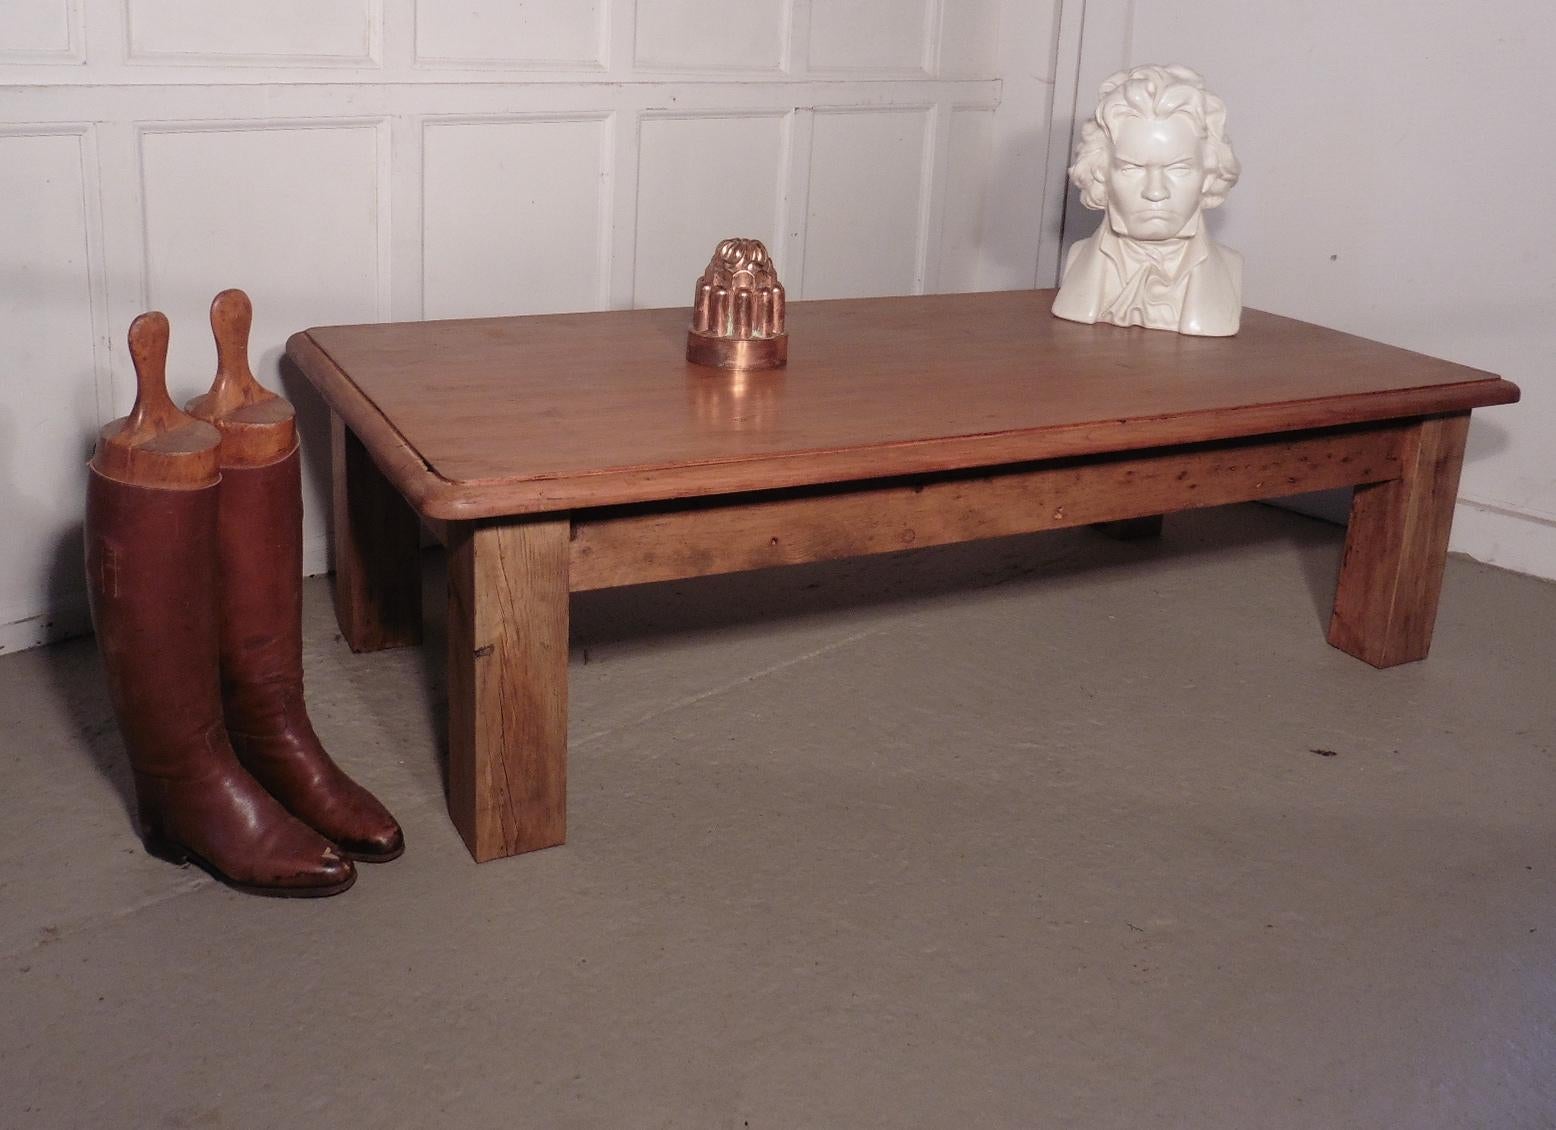 Large Victorian Pine Farmhouse coffee table
 
This is good honest farmhouse table, the leg height has been reduced making it in to a Low Table or Coffee Table
The top of the table is made from 1.5” thick pine and it has a moulded edge and new